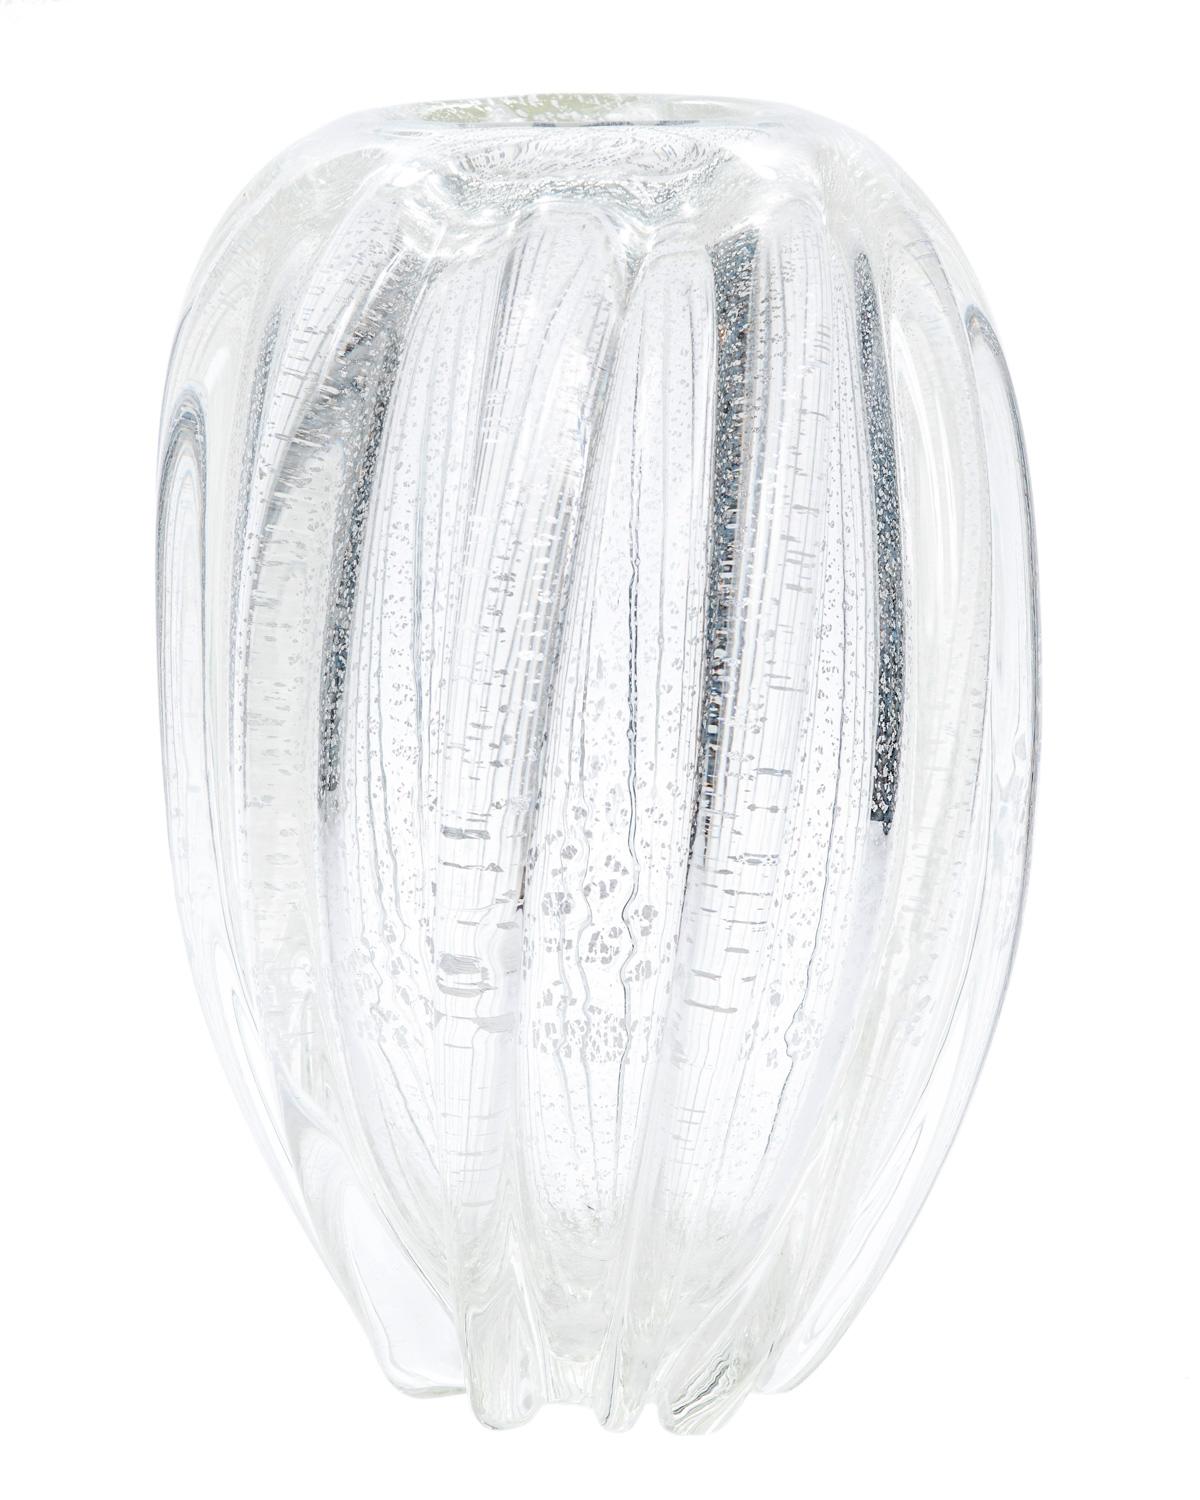 This stunning large and weighty twisted clear glass vase with flecks of silver infused in the body makes a bold statement in any room.
 